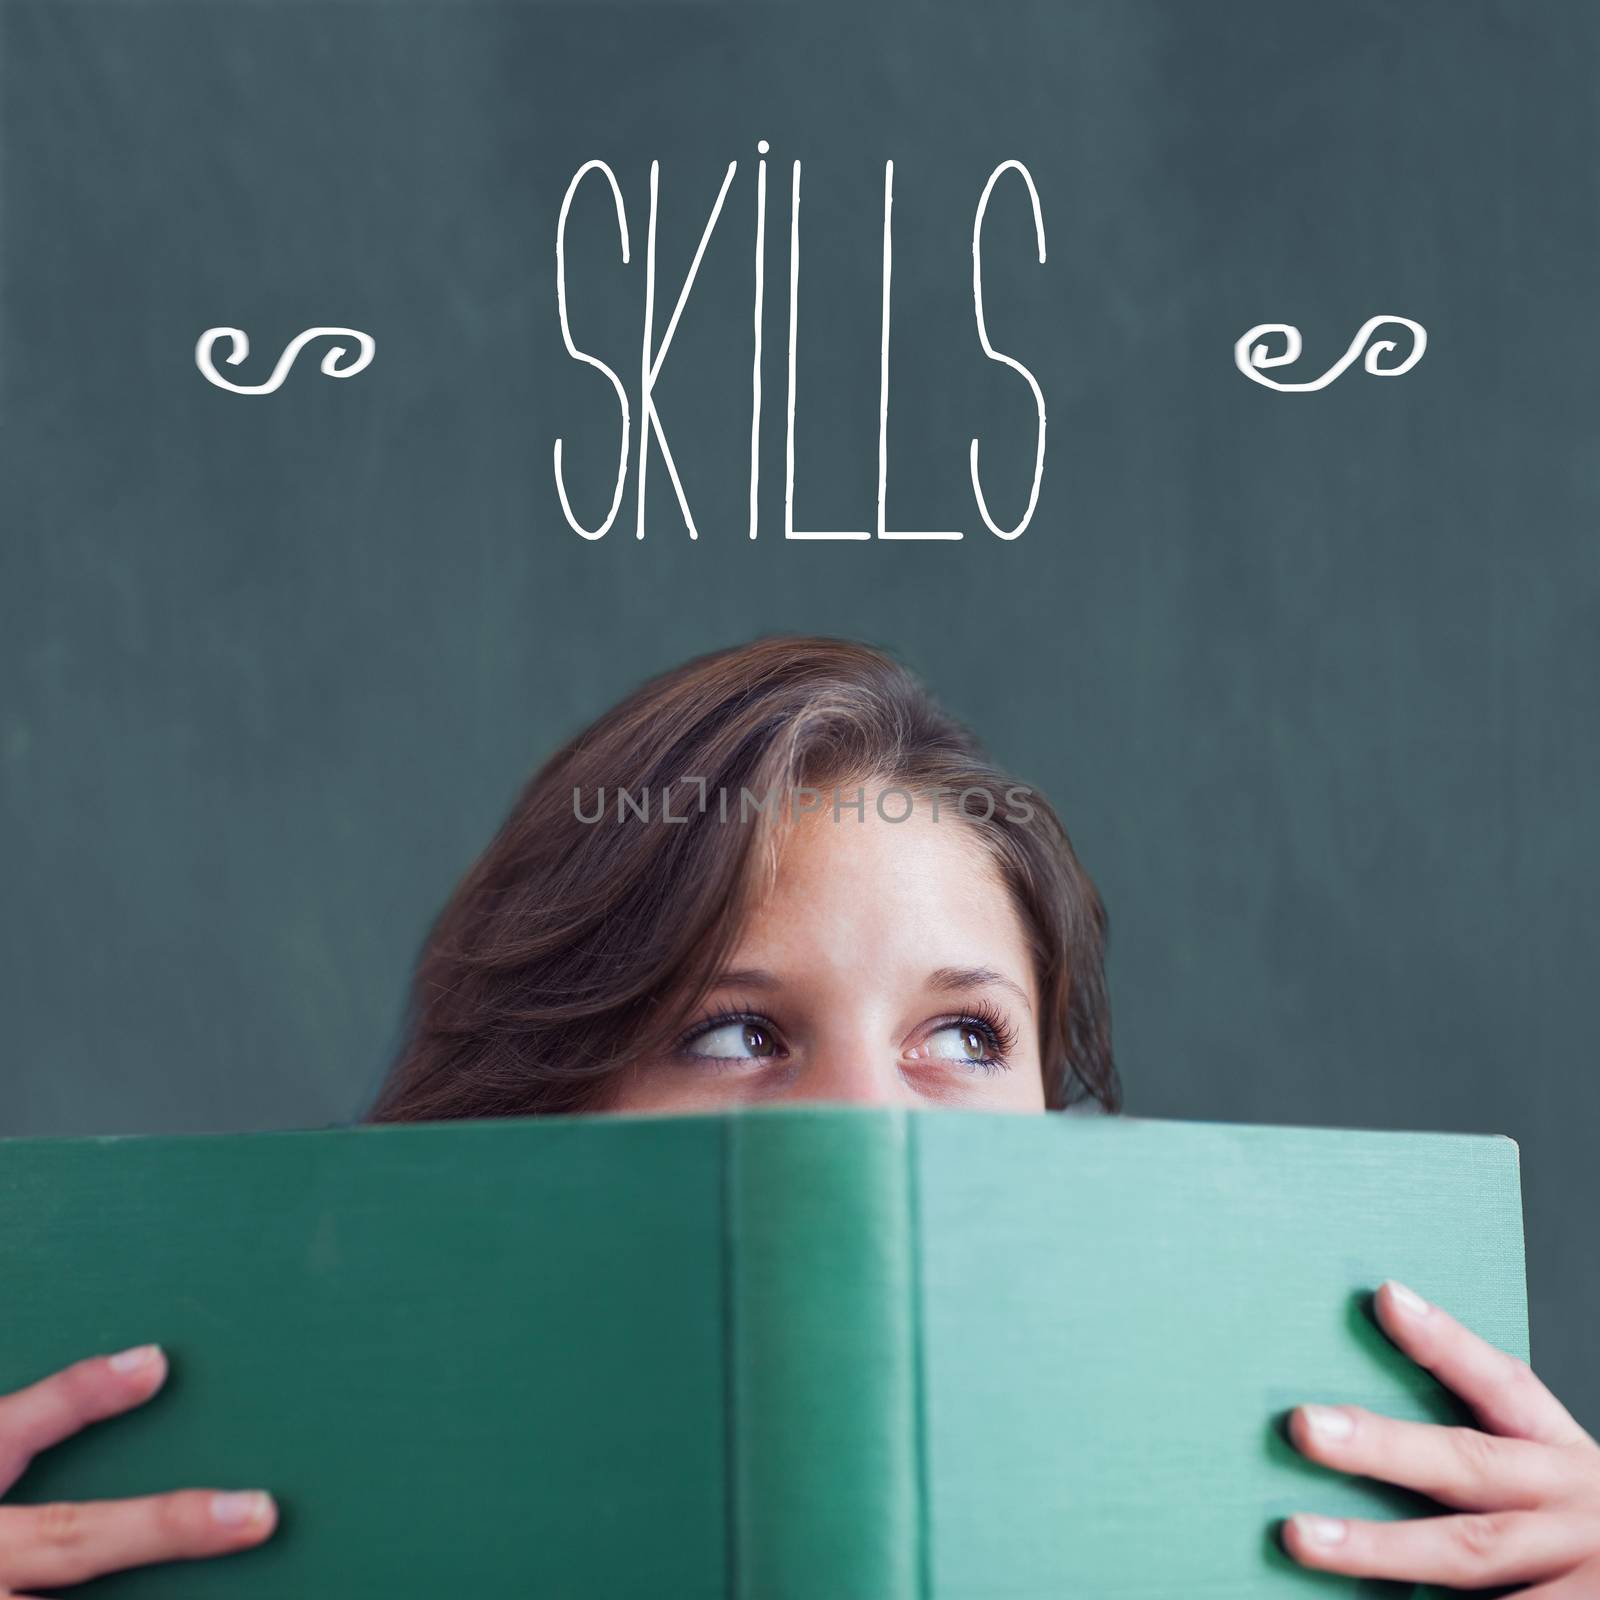 The word skills against student holding book